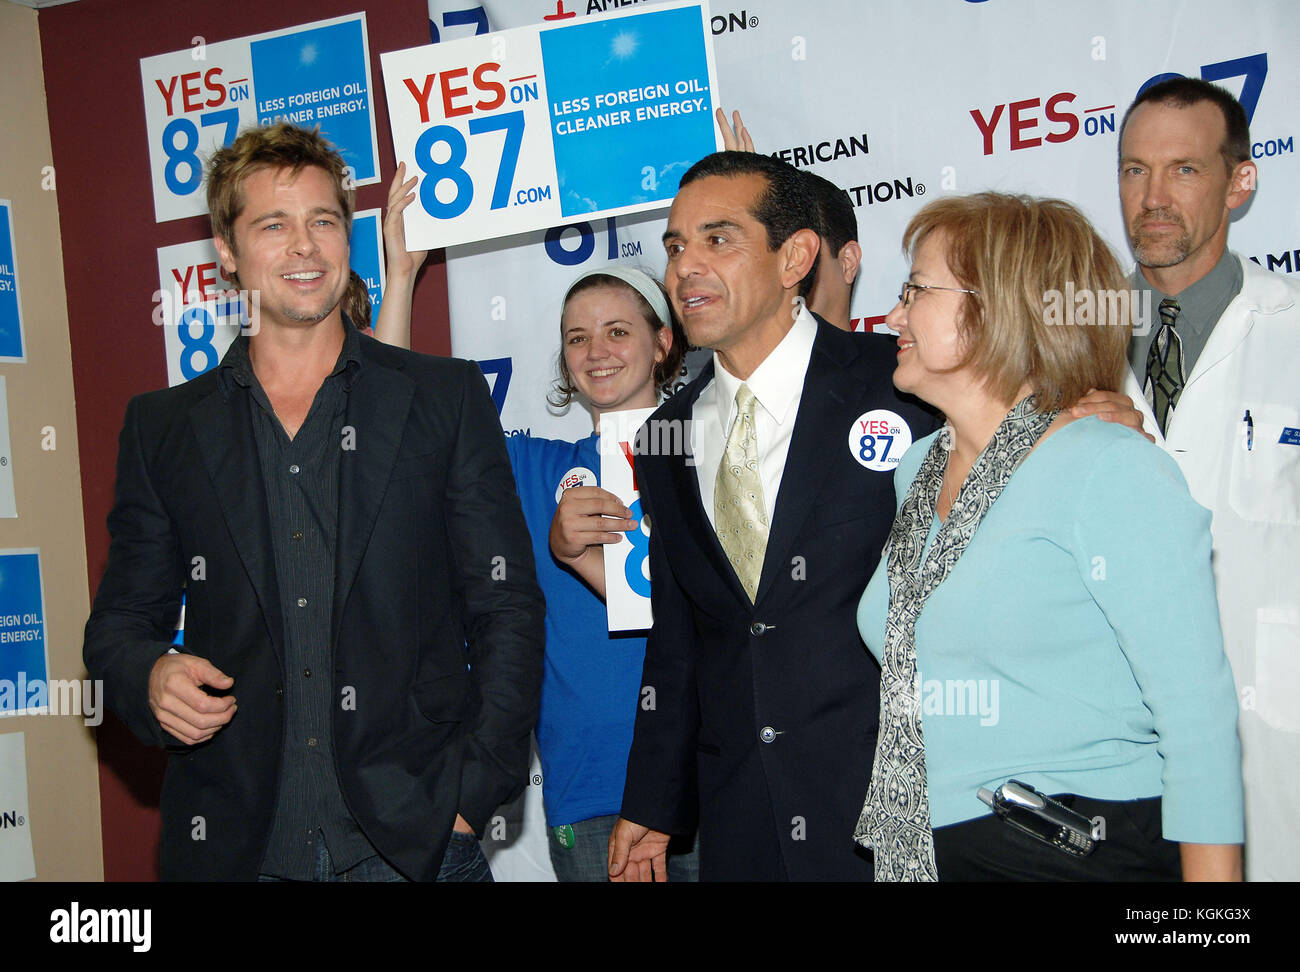 Brad Pitt and Los Angeles mayor Antonio Villaraigosa  at the L.A. Labor Headquarters for a get out and vote YES on 87.  headshot full length smile Brad Pitt 012  = Brad Pitt attending, People, Vertical, USA, Los Angeles, Actor, Film Premiere,  Photography, Red Carpet Event, Brad Pitt - Actor, Arts Culture and Entertainment, , Celebrities, Stock Photo